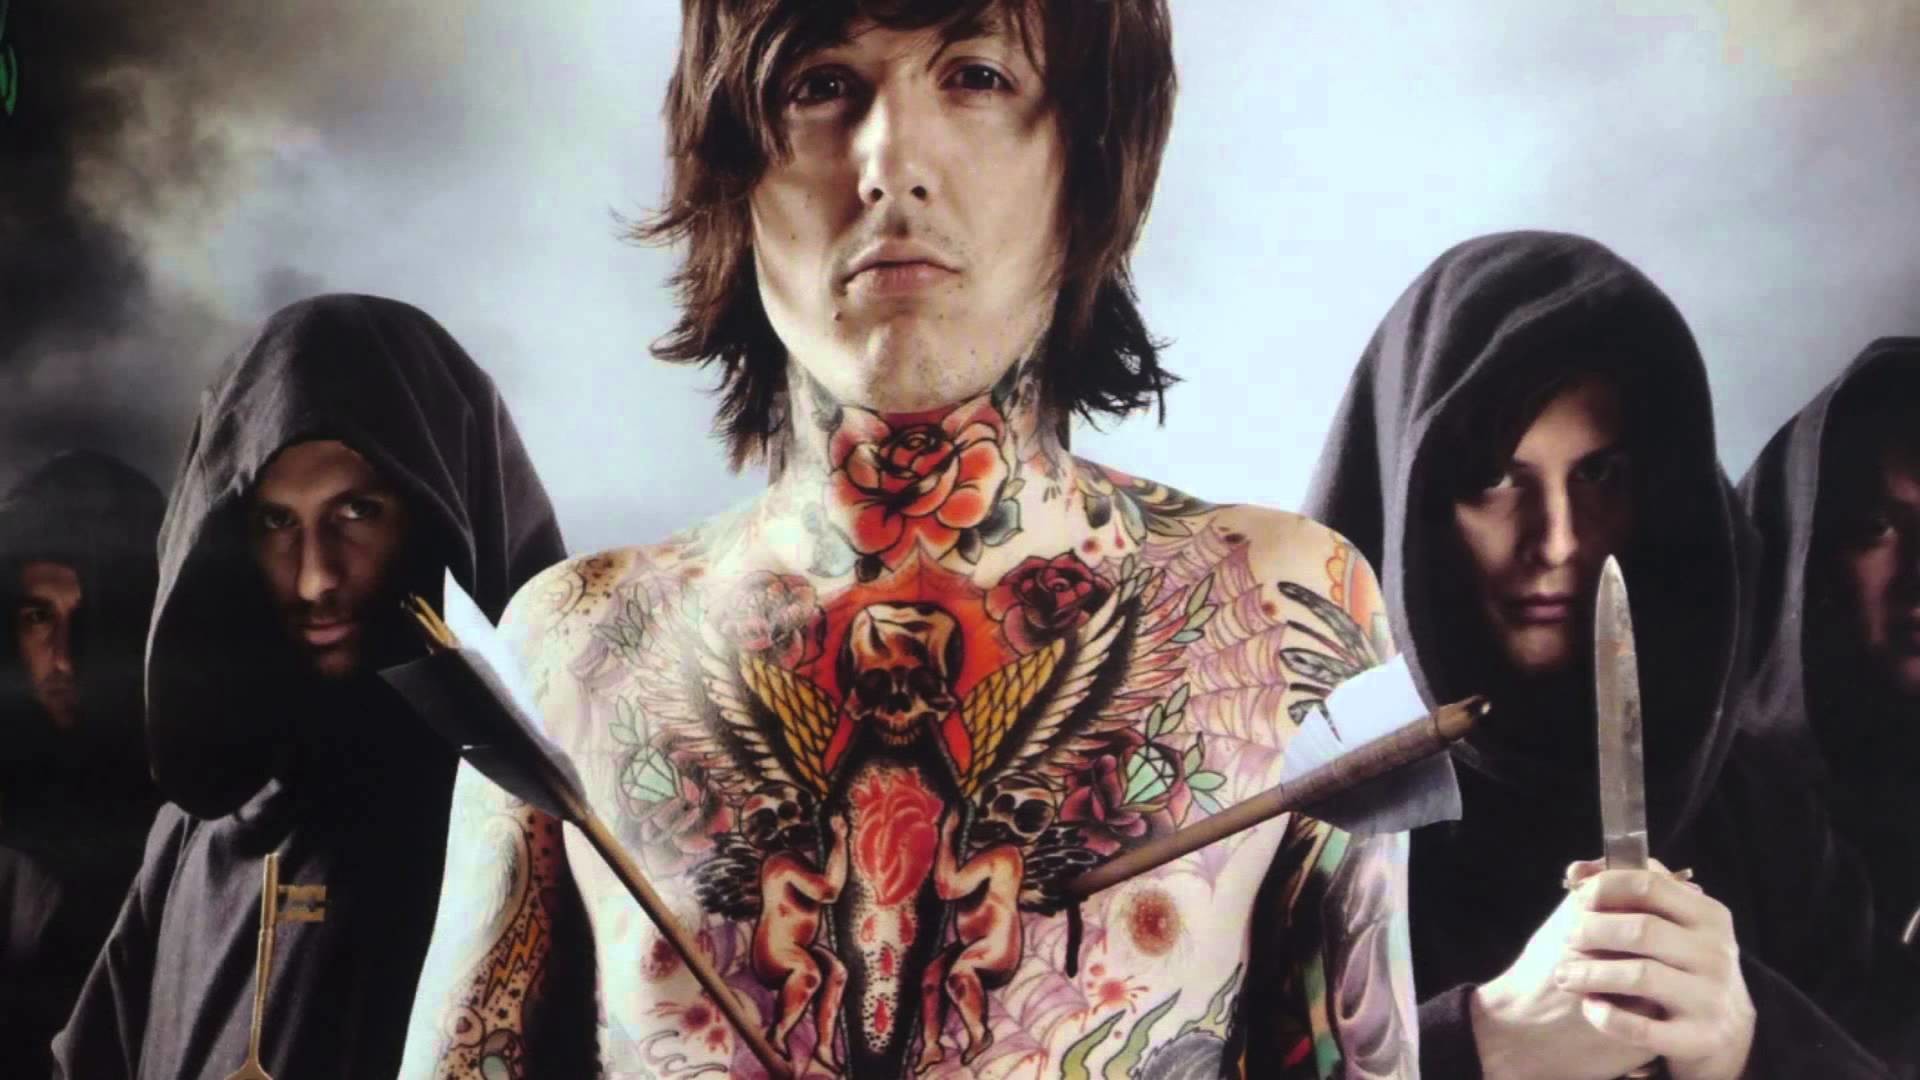 1920x1080 ... Oliver Sykes Wallpapers - Wallpaper Cave ...